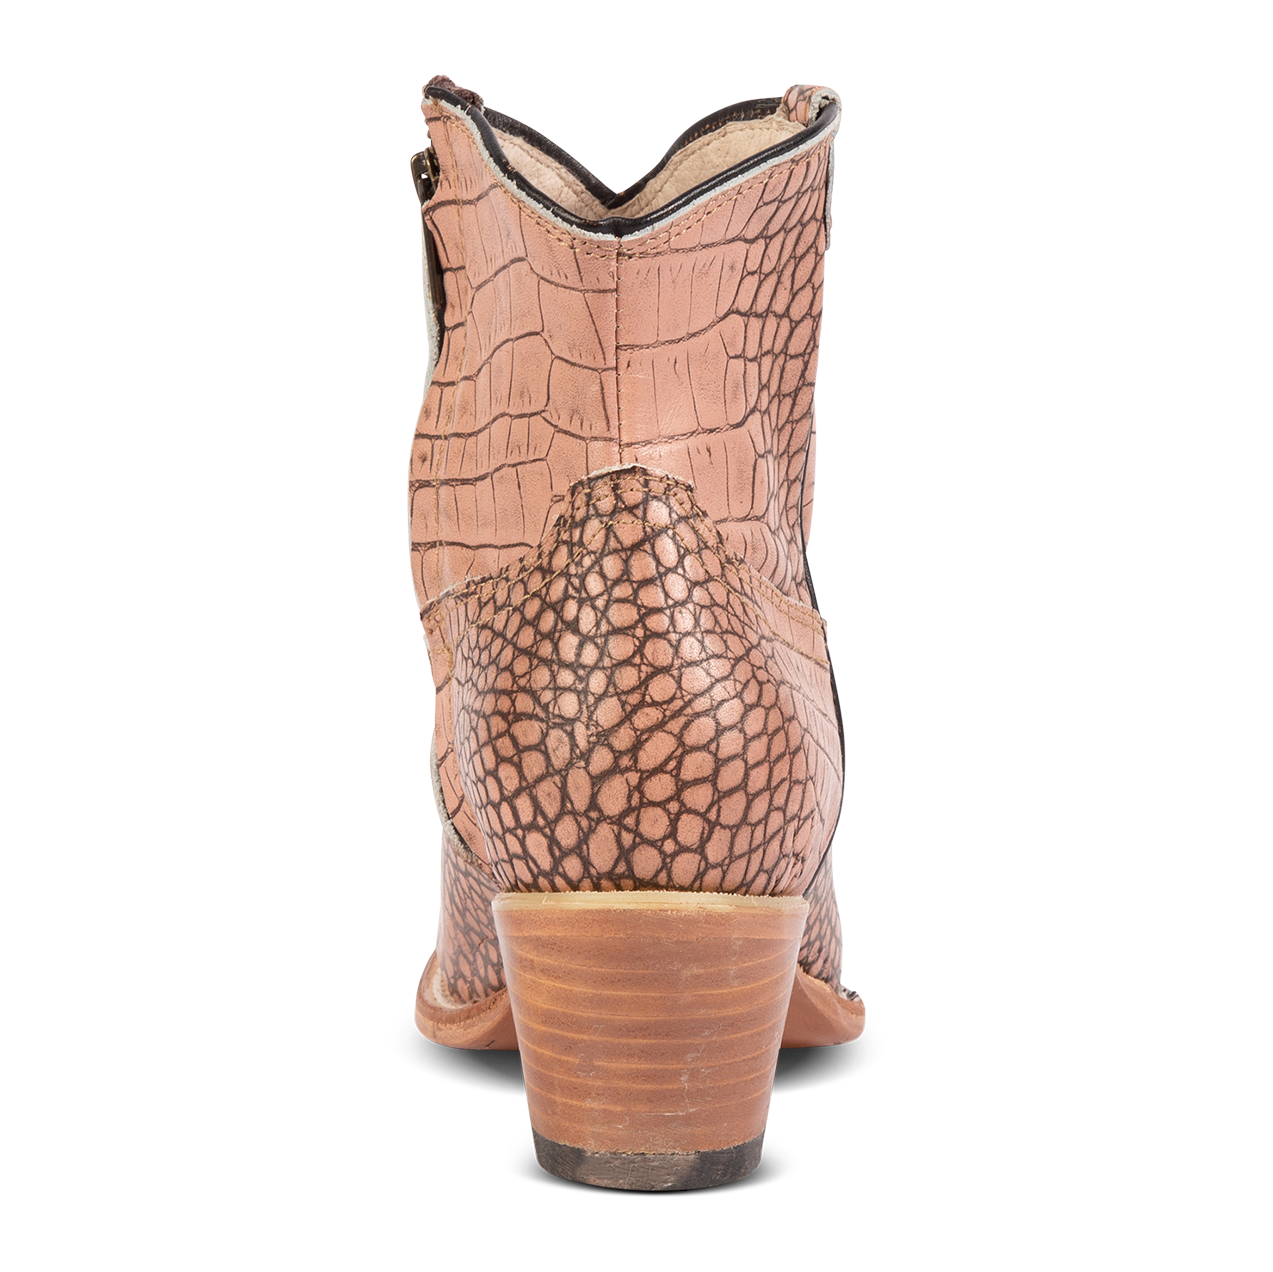 Back view showing low heel and back dip on FREEBIRD women's Miramar blush croco ankle bootie